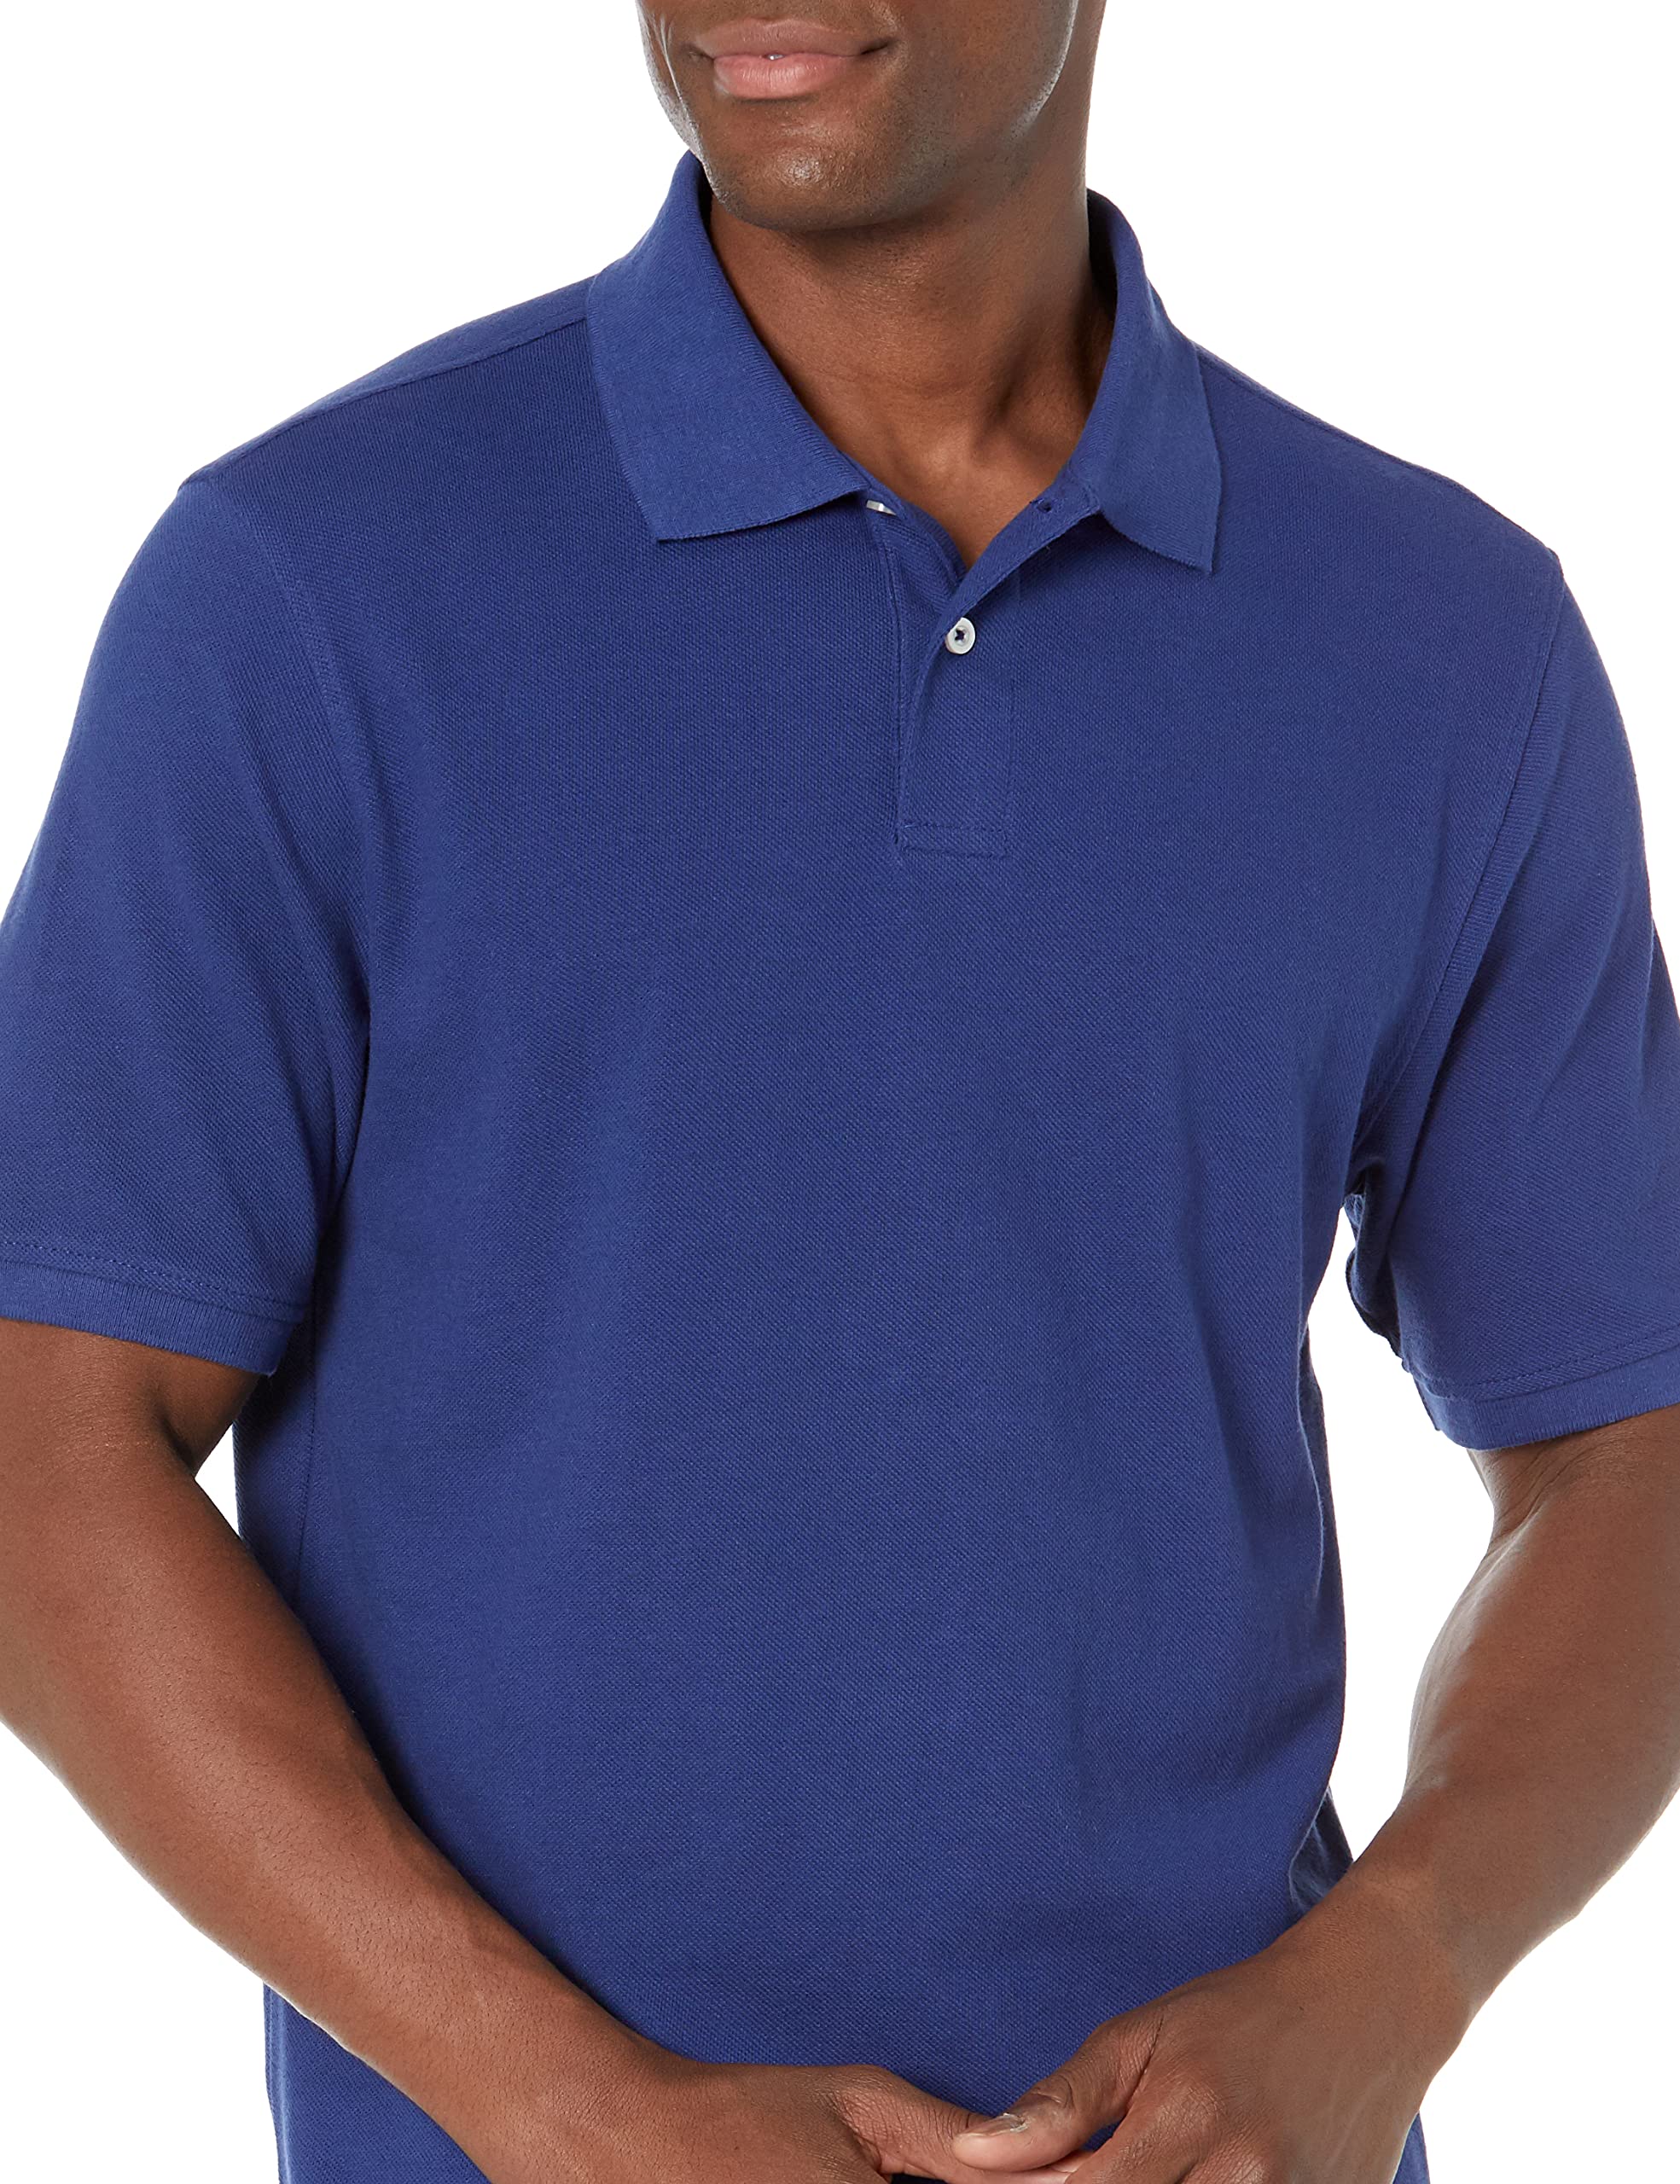 Amazon Essentials Men's Regular-Fit Cotton Pique Polo Shirt (Available in Big & Tall)